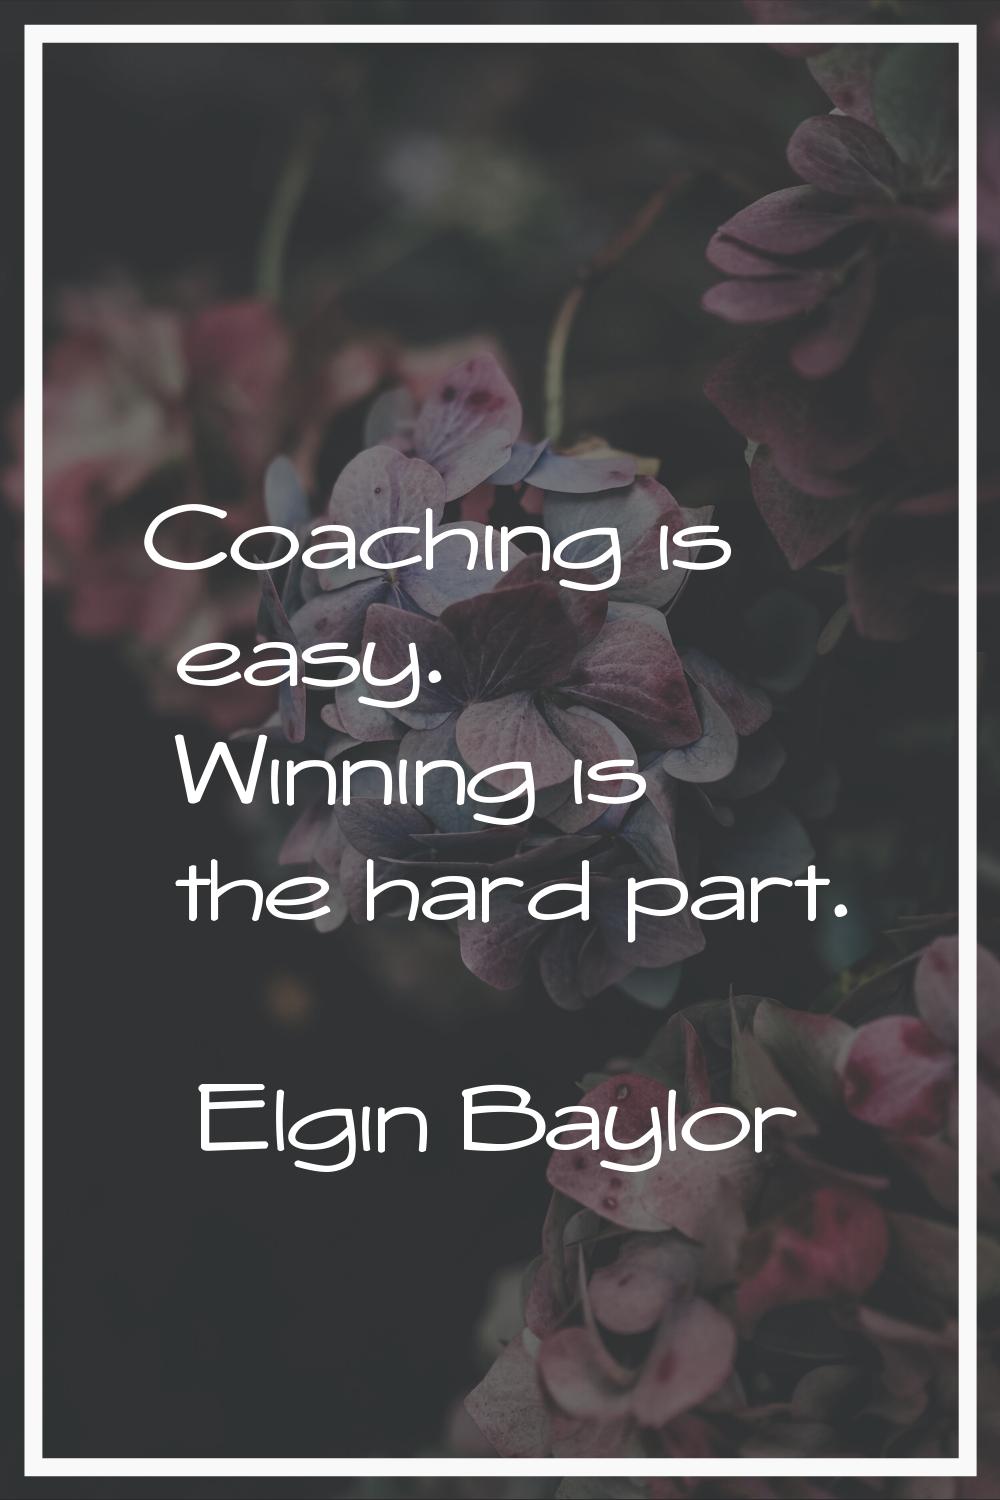 Coaching is easy. Winning is the hard part.